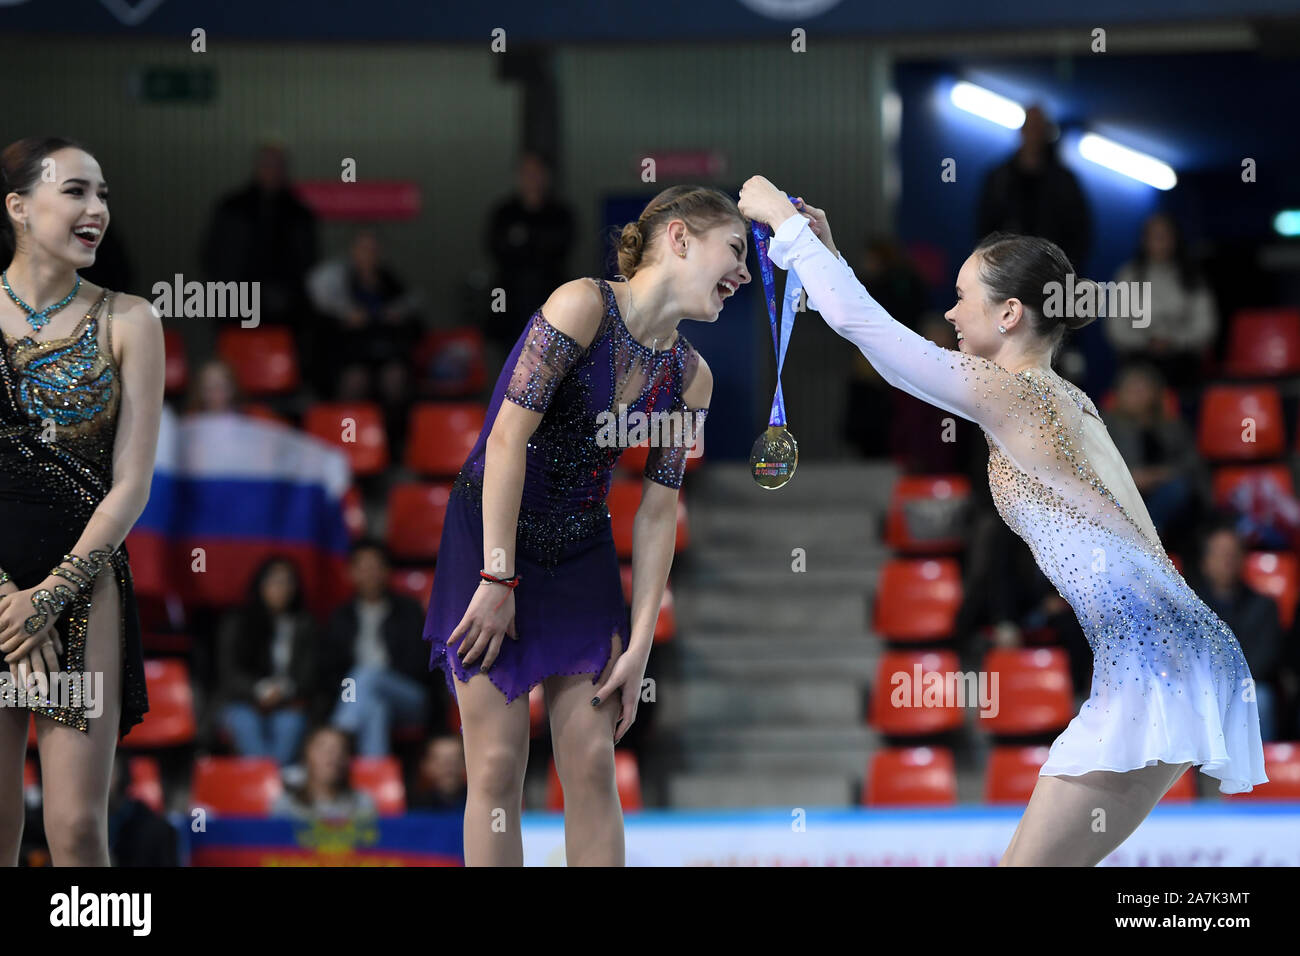 Grenoble, France. 2nd Nov 2019.  Ladies Free skating awards, Alena KOSTORNAIA, from Russia, first place, Alina ZAGITOVA, from Russia, second place, Mariah BELL, from USA, third place, at ISU Grand Prix of Figure Skating 2019, Internationaux de France de Patinage 2019, at Patinoire Polesud on November 02, 2019 in Grenoble, France. Credit: Raniero Corbelletti/AFLO/Alamy Live News Credit: Aflo Co. Ltd./Alamy Live News Stock Photo